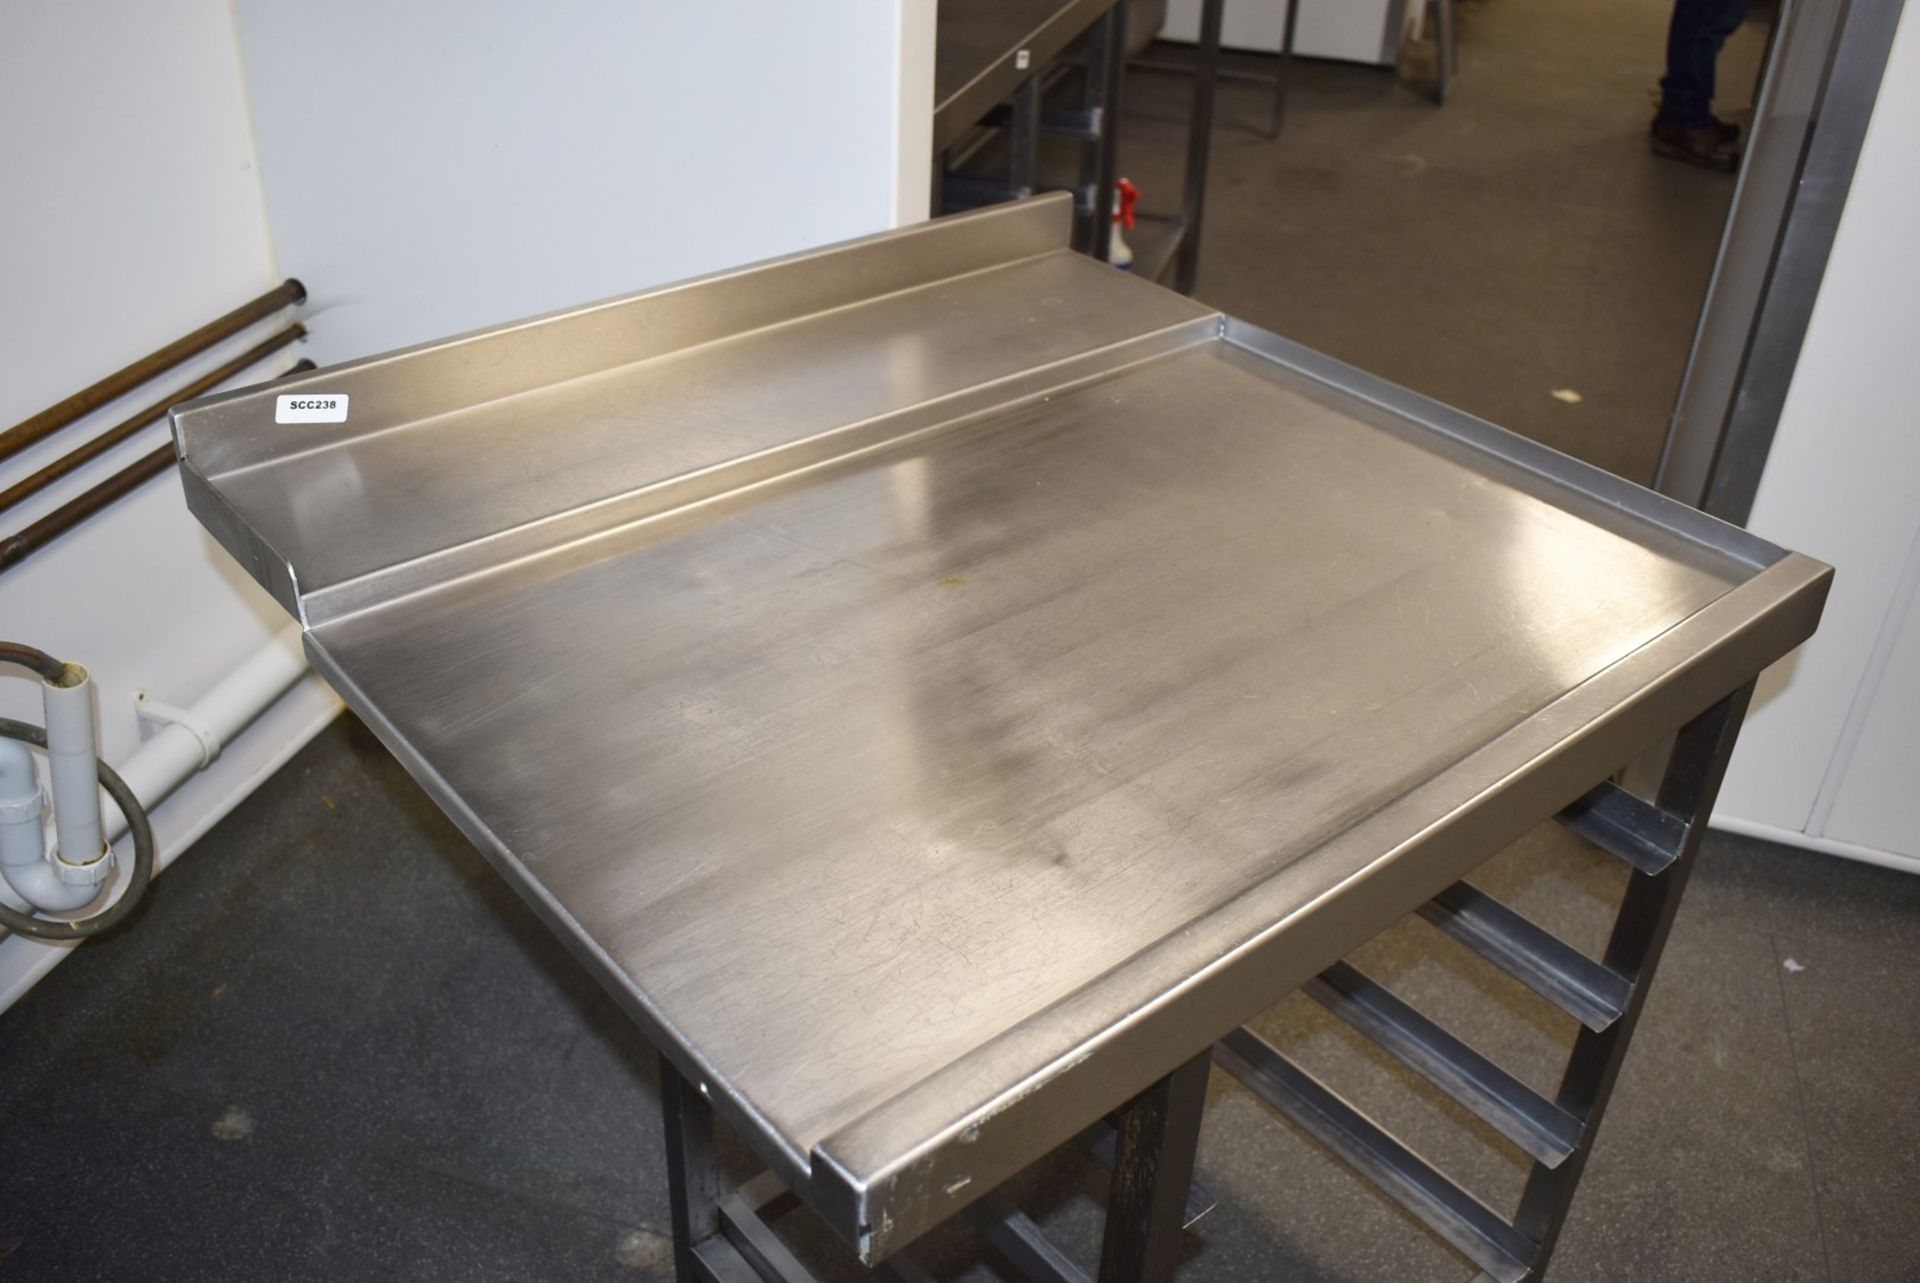 1 x Commercial Outlet Passthrough Wash Bench With Tray Runners - Size: H85 x W80 x D75 cms - Image 2 of 3